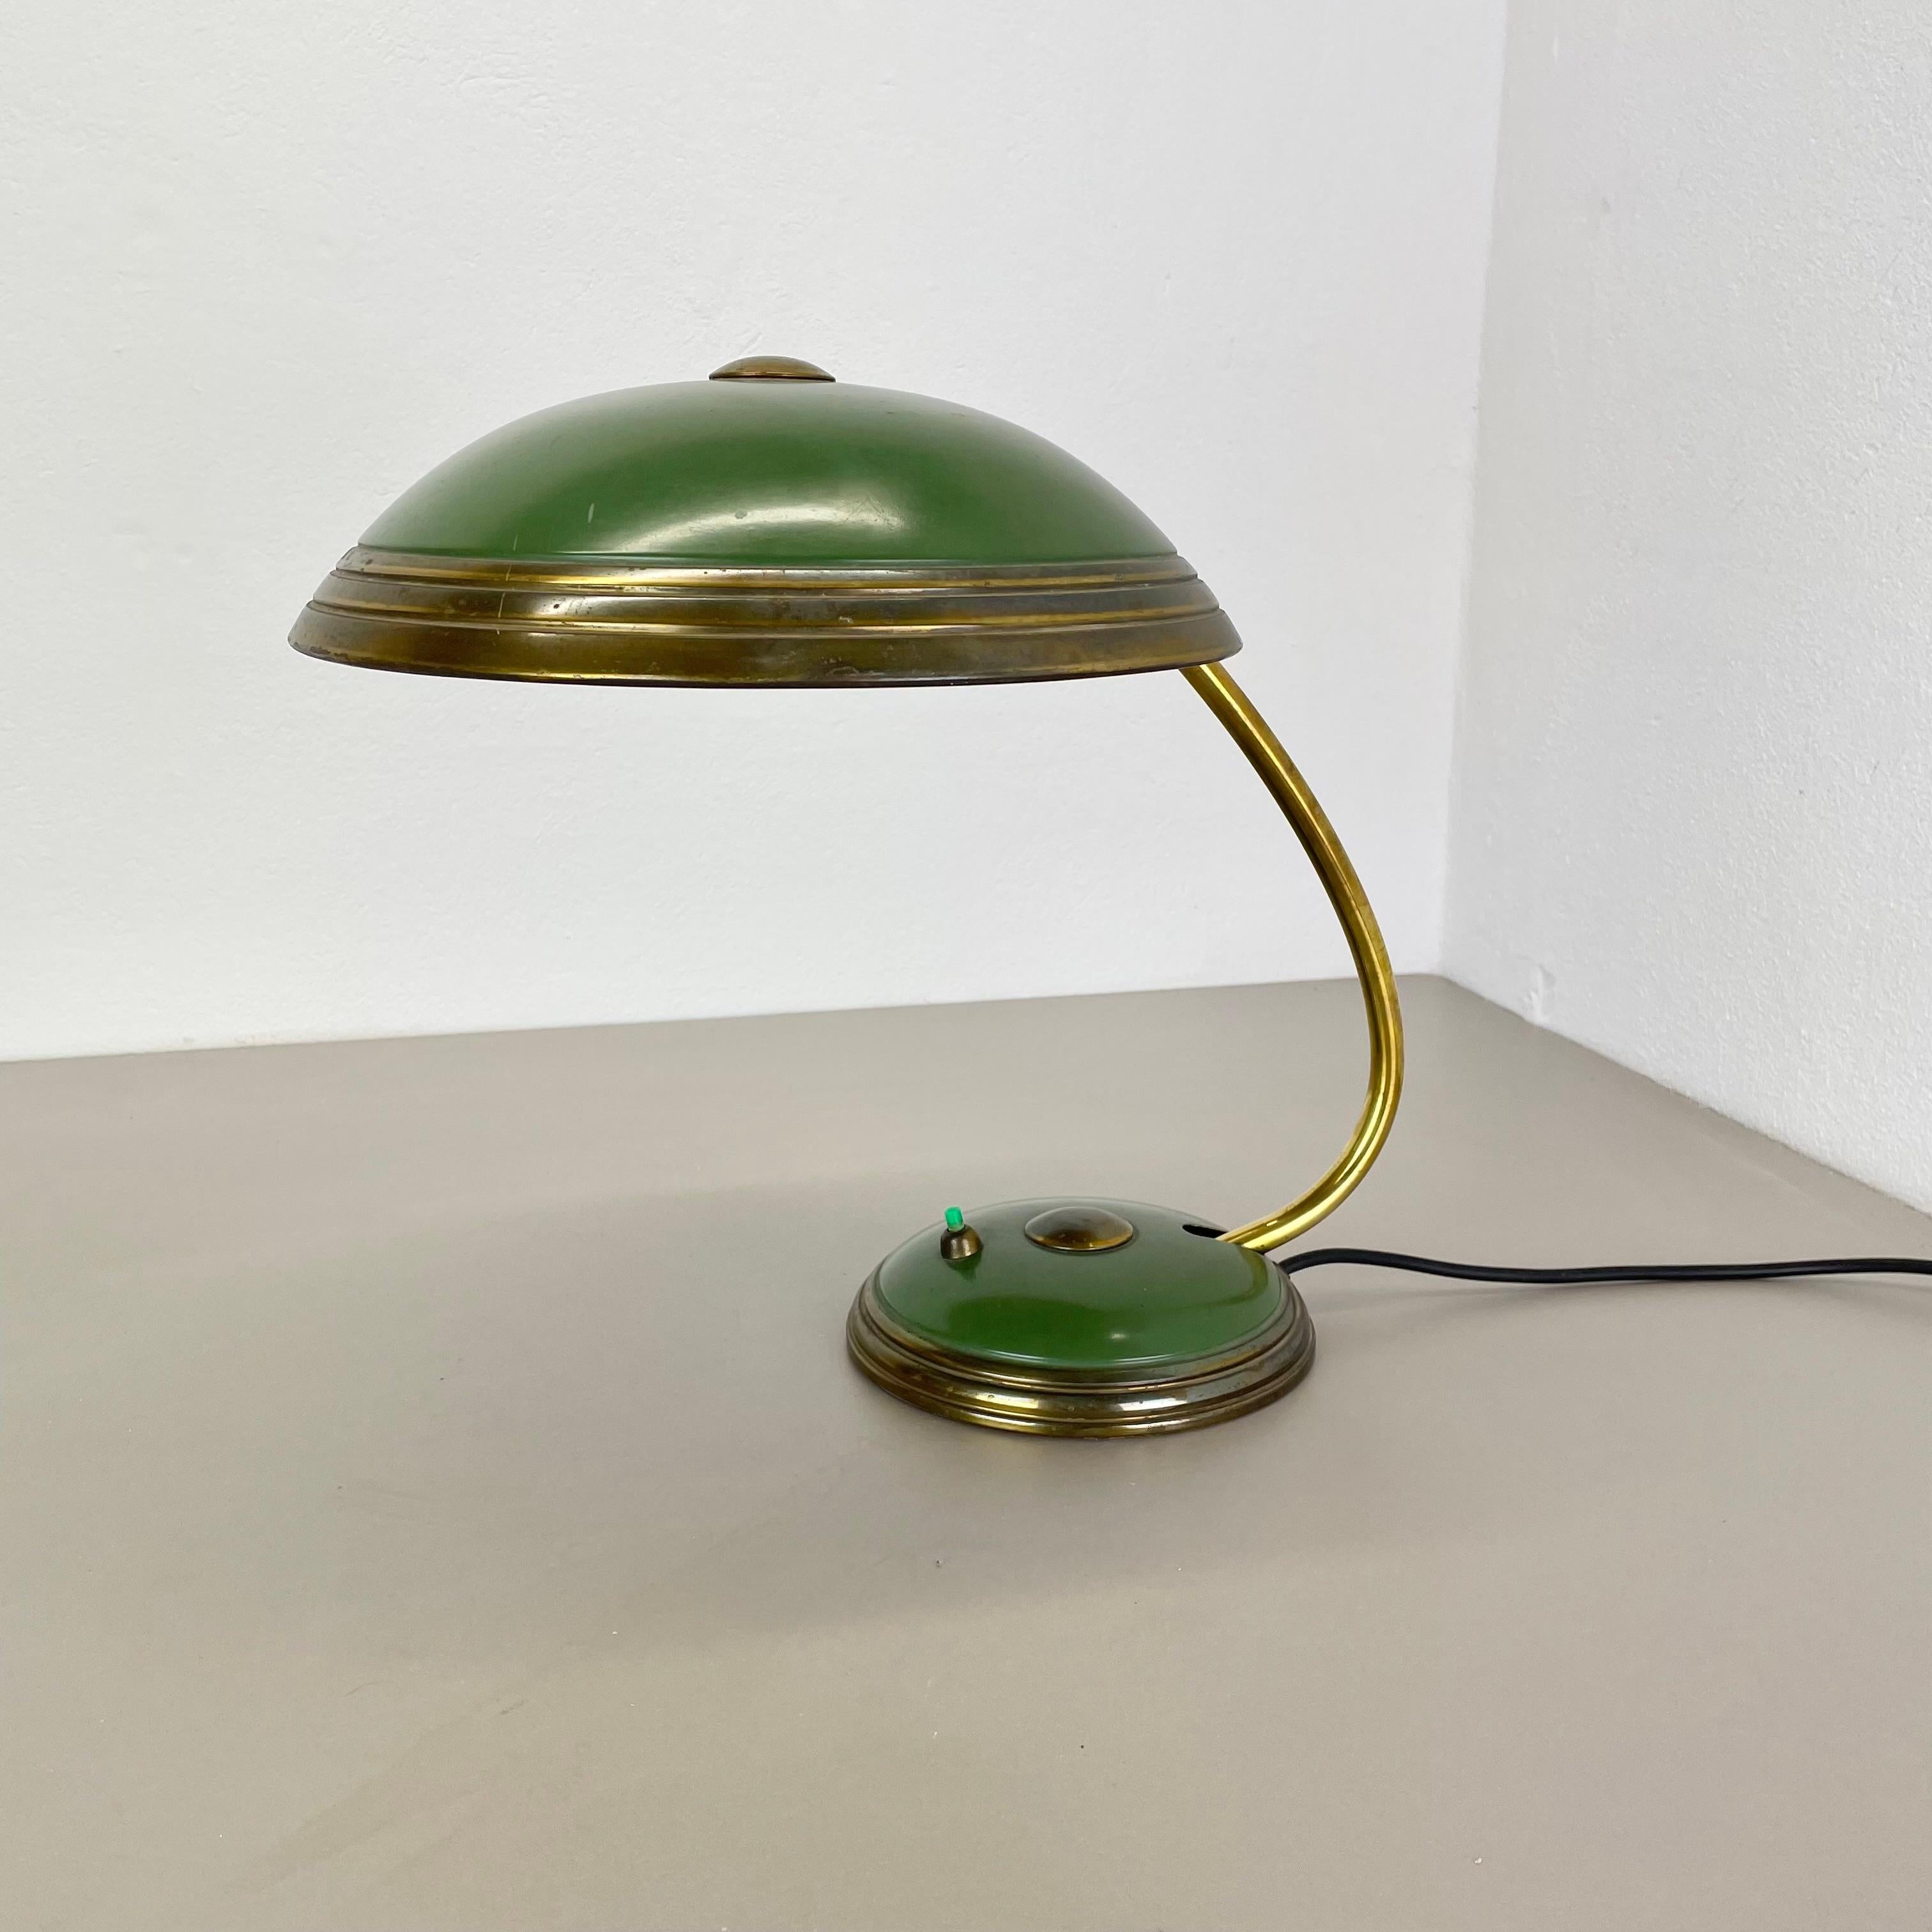 Article:

Desk light


Producer:

HELO Leuchten, Germany


Age:

1950s


Original Helo Leuchten Bauhaus Light, designed and produced in the 1950s in Germany. All original good and full working condition with patina. One of a kind German Bauhaus